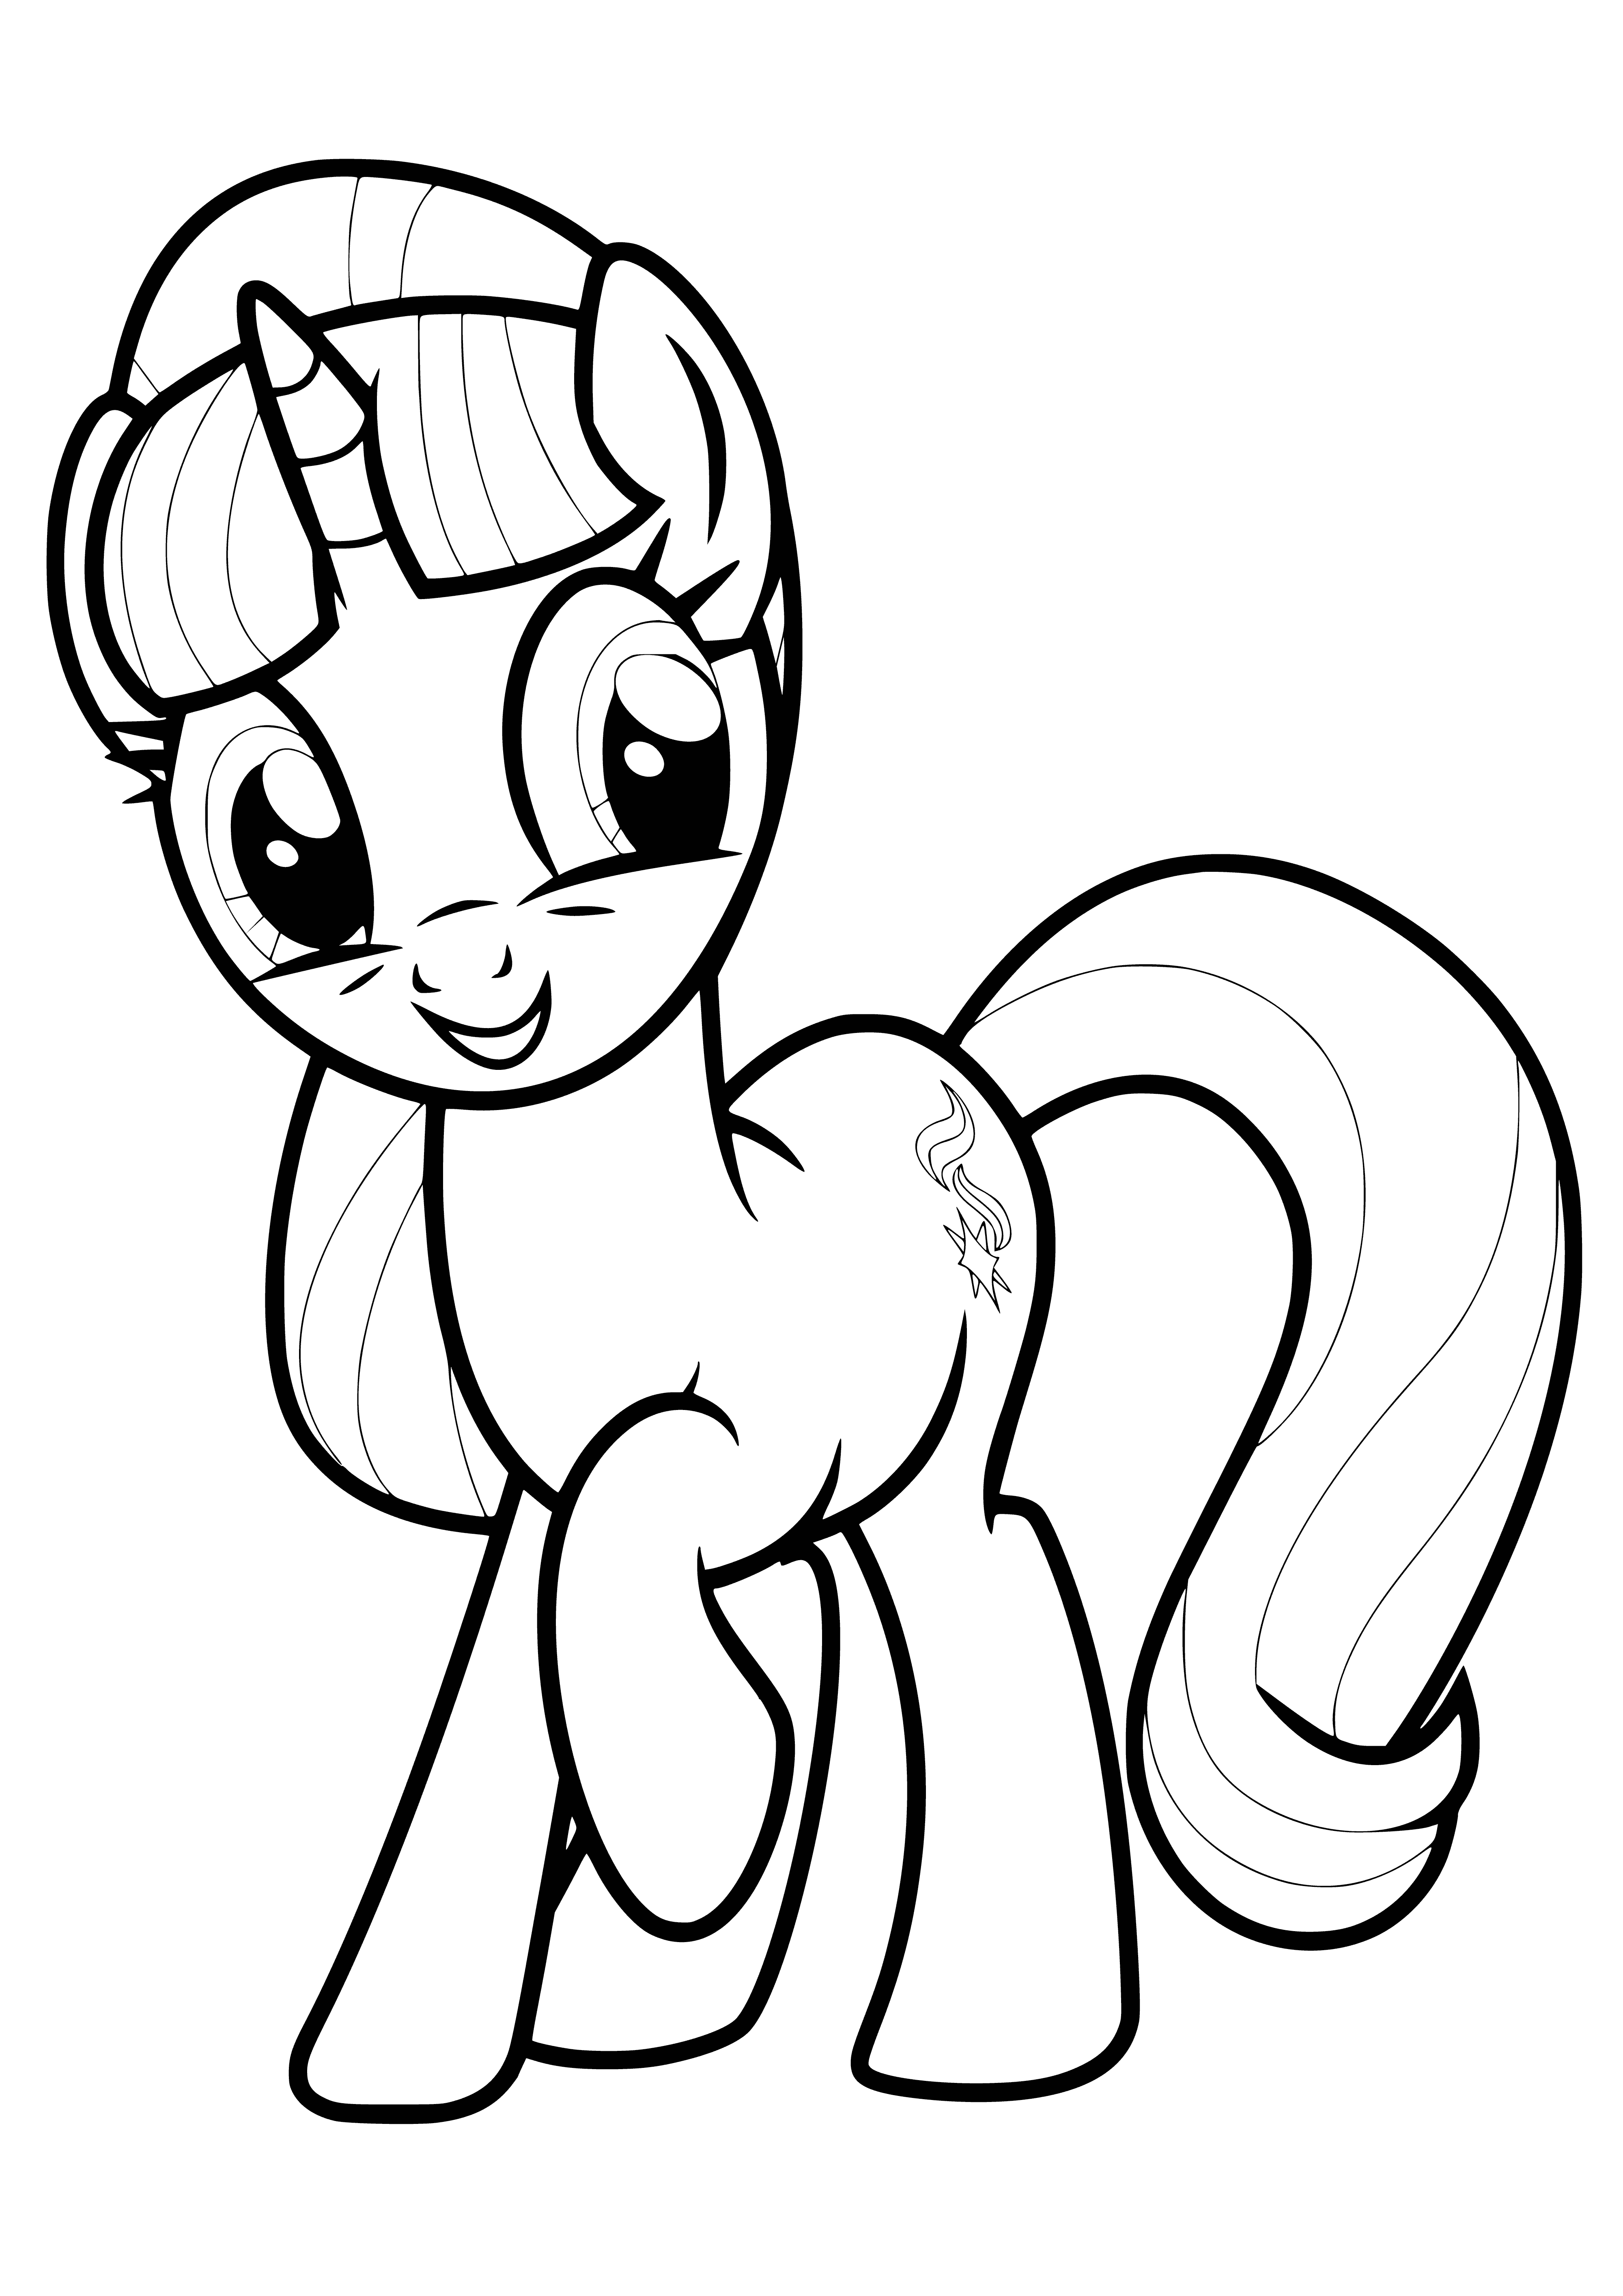 coloring page: Purple pony with star-shaped cutie mark stands in front of a glowing star. #PonyColoringPage